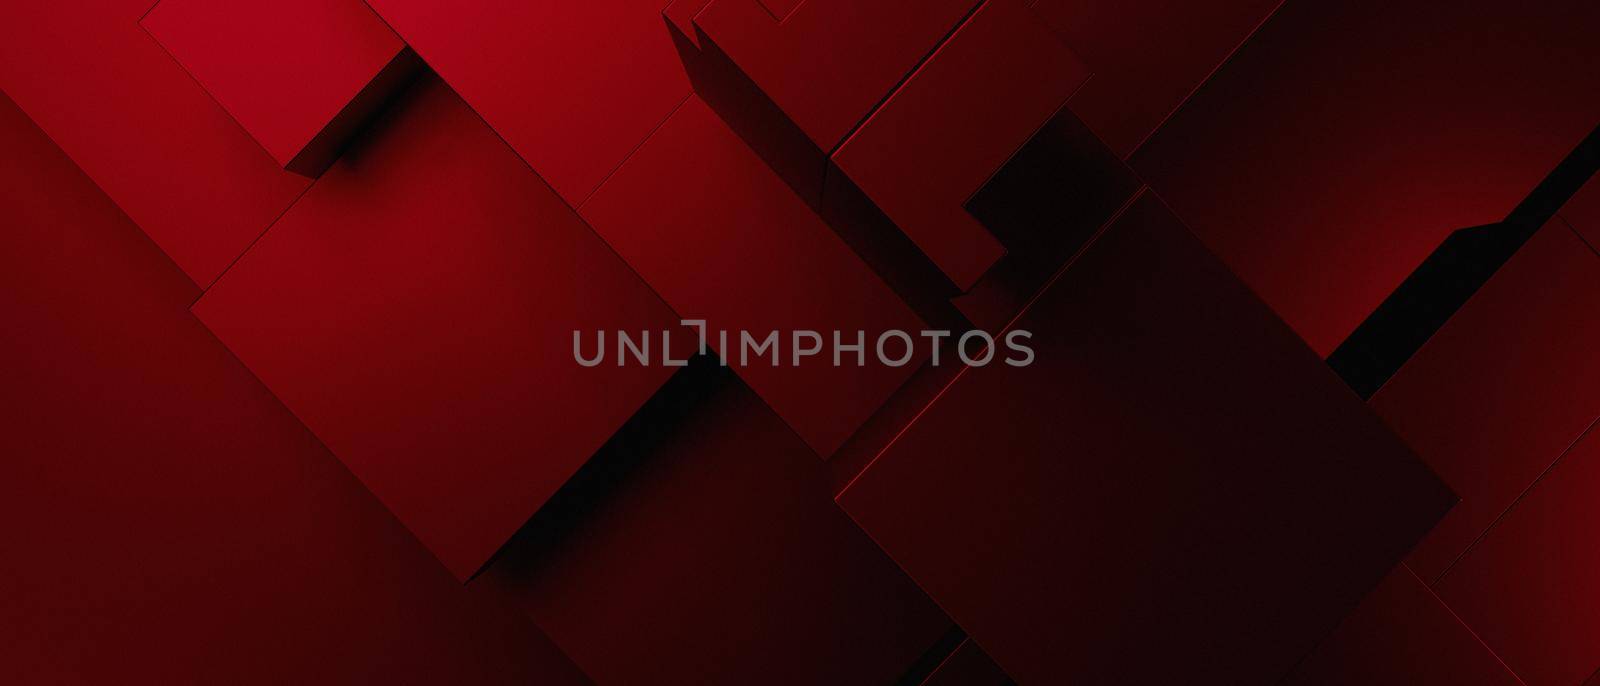 Abstract Luxury Futuristic Block Cubes Future Dark Red 3D Background 3D Illustration